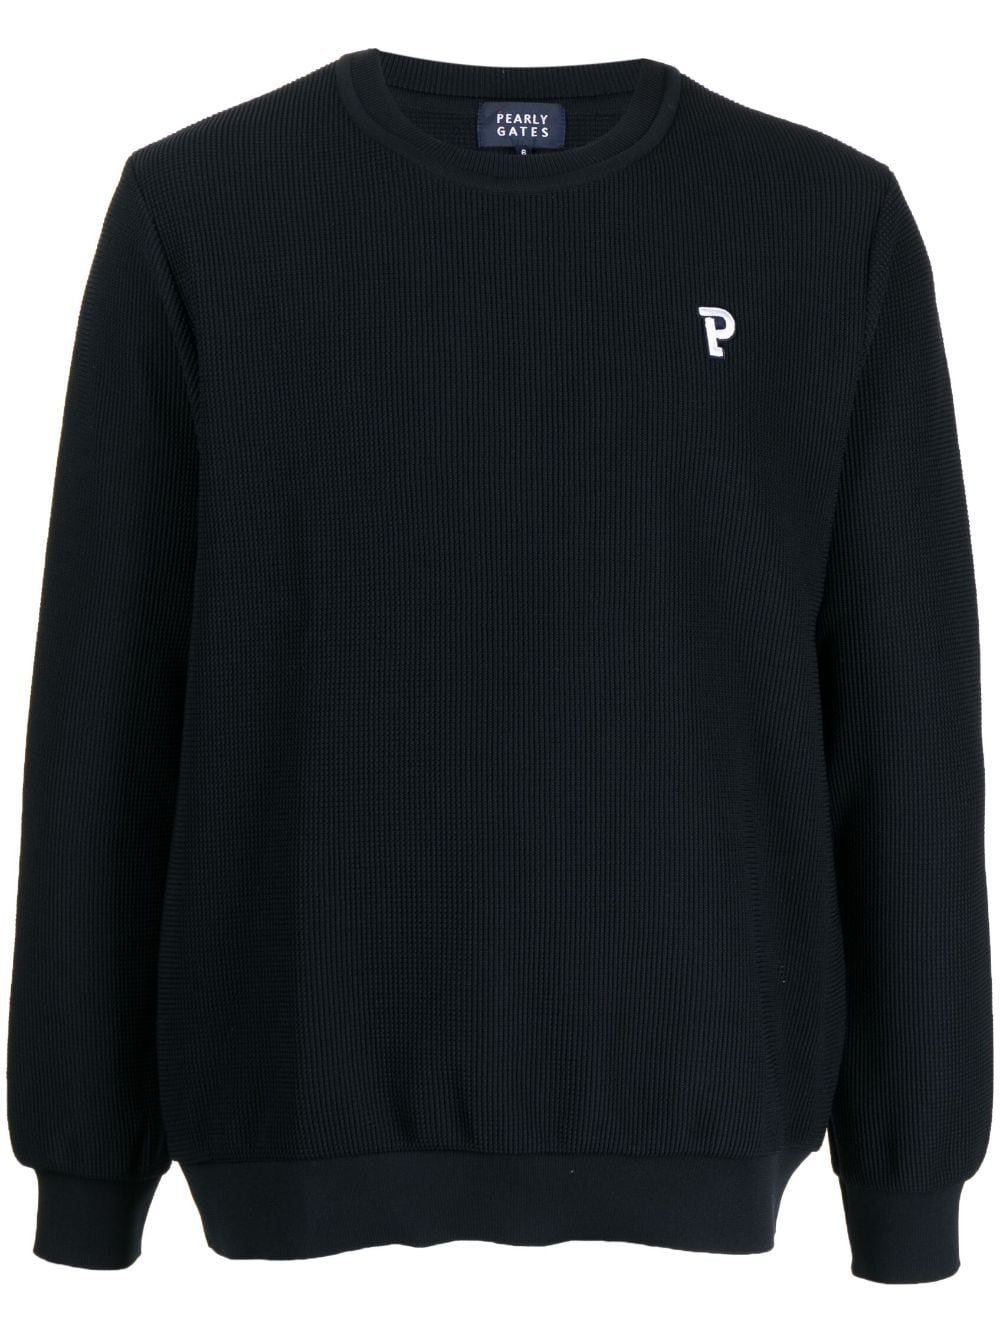 PEARLY GATES logo-patch crew neck sweater - Black